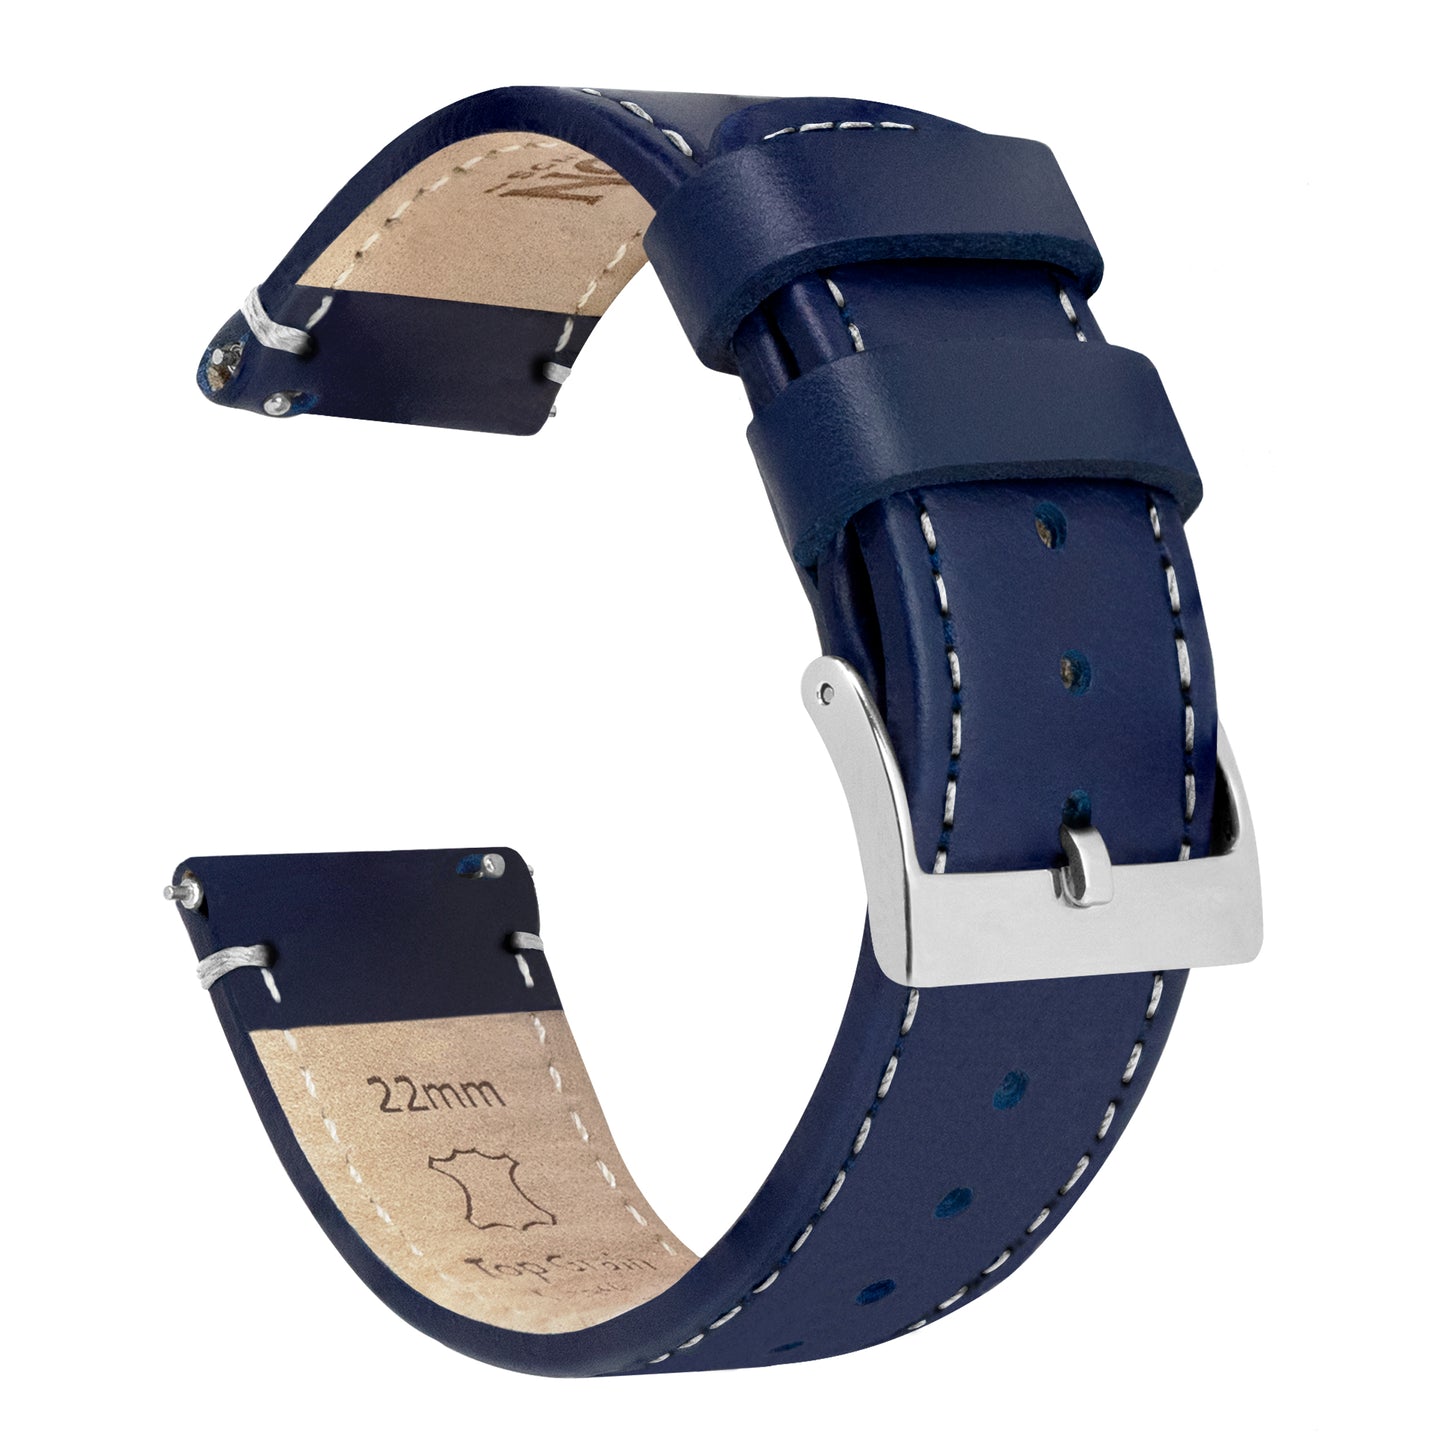 Fossil Q |  Navy Blue Leather & Linen White Stitching - Barton Watch Bands